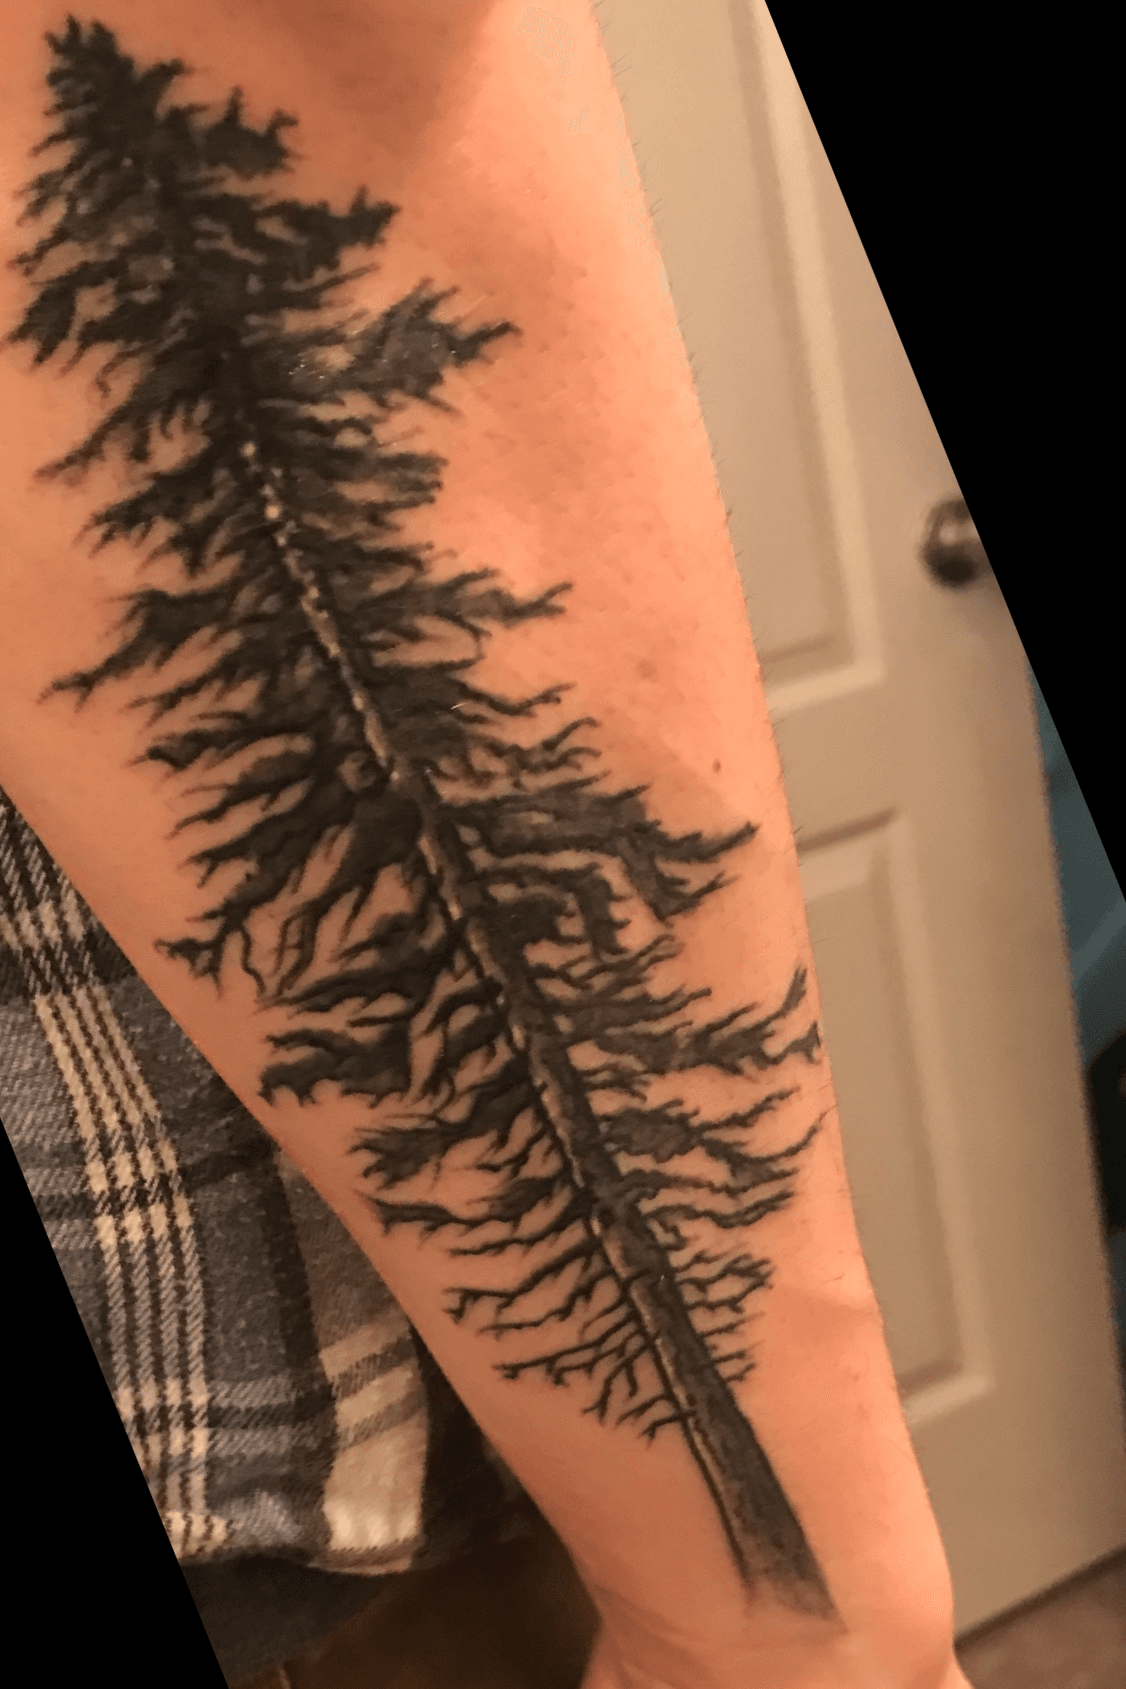 Small pine tree tattoo on the inner forearm  Tattoogridnet